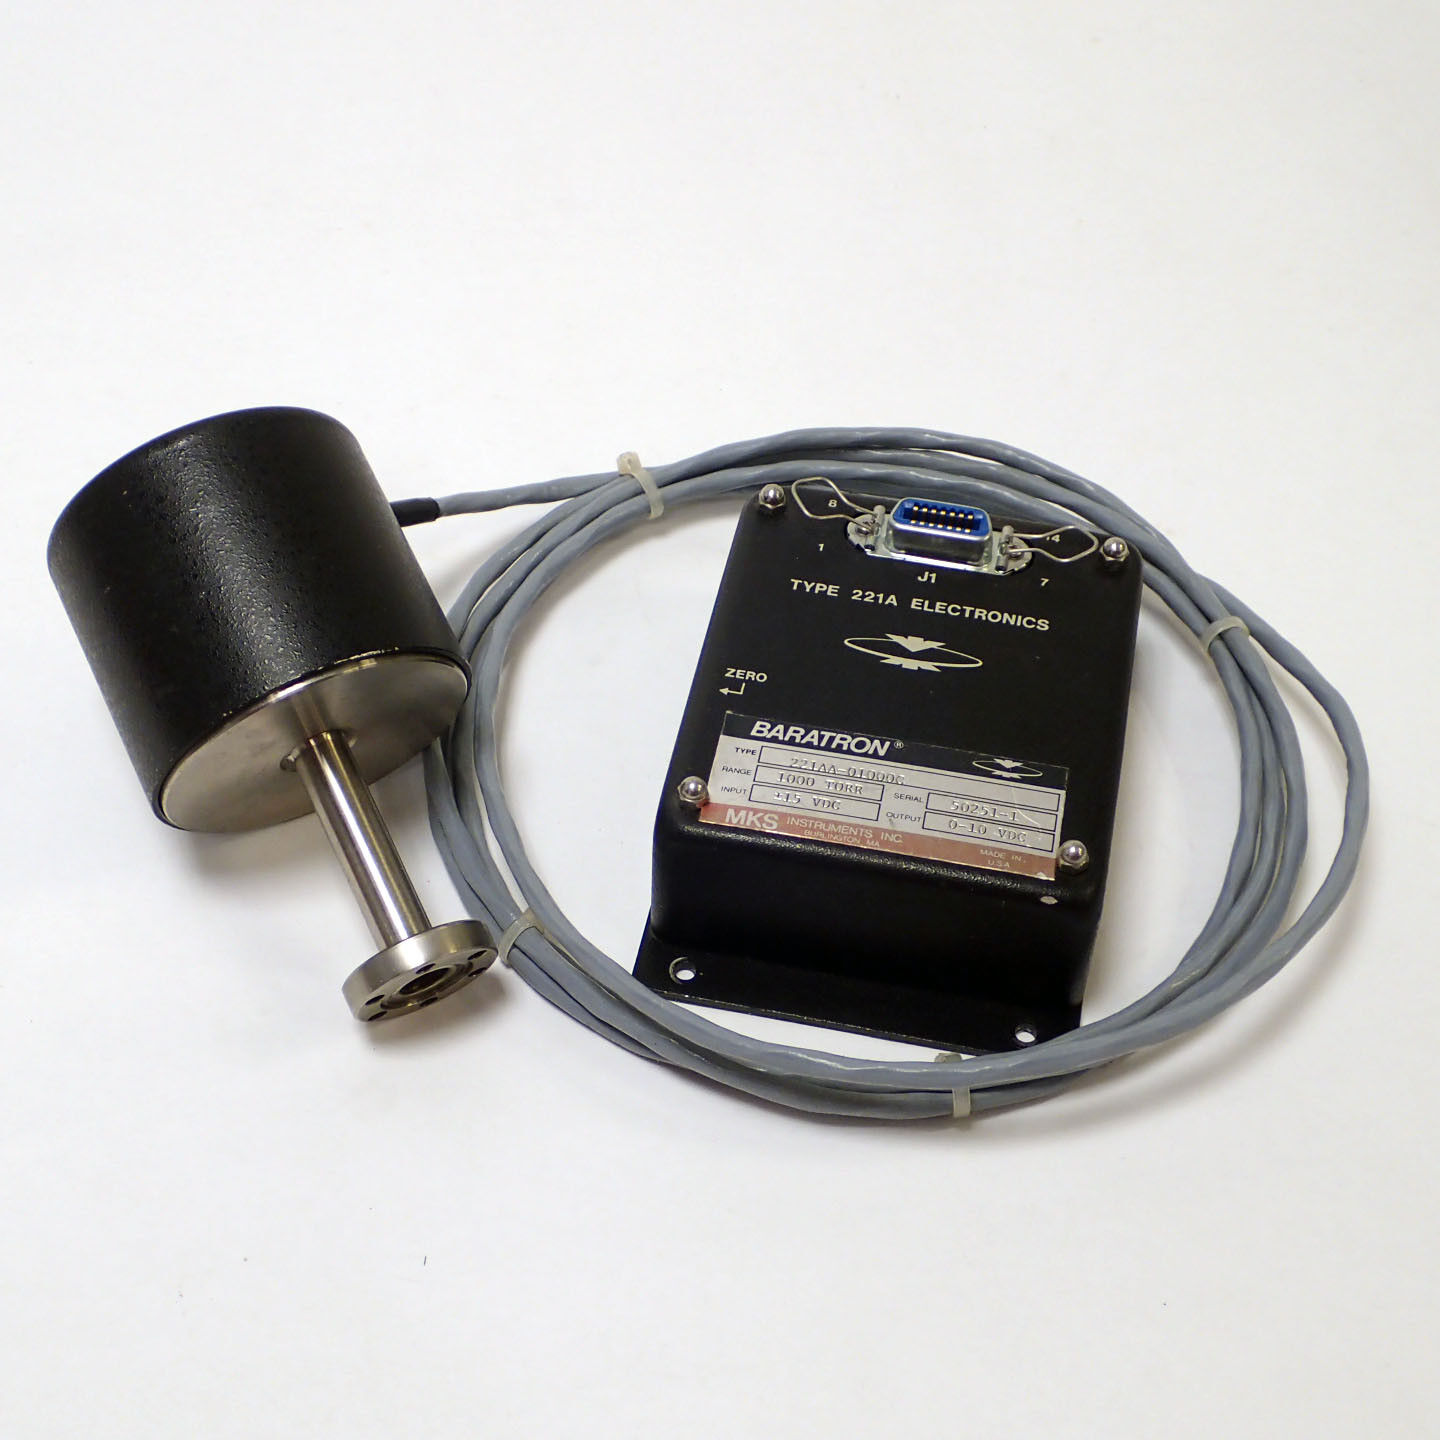 Mks 221a / 221aa-01000c Baratron Differential Capacitance Manometer Transducer